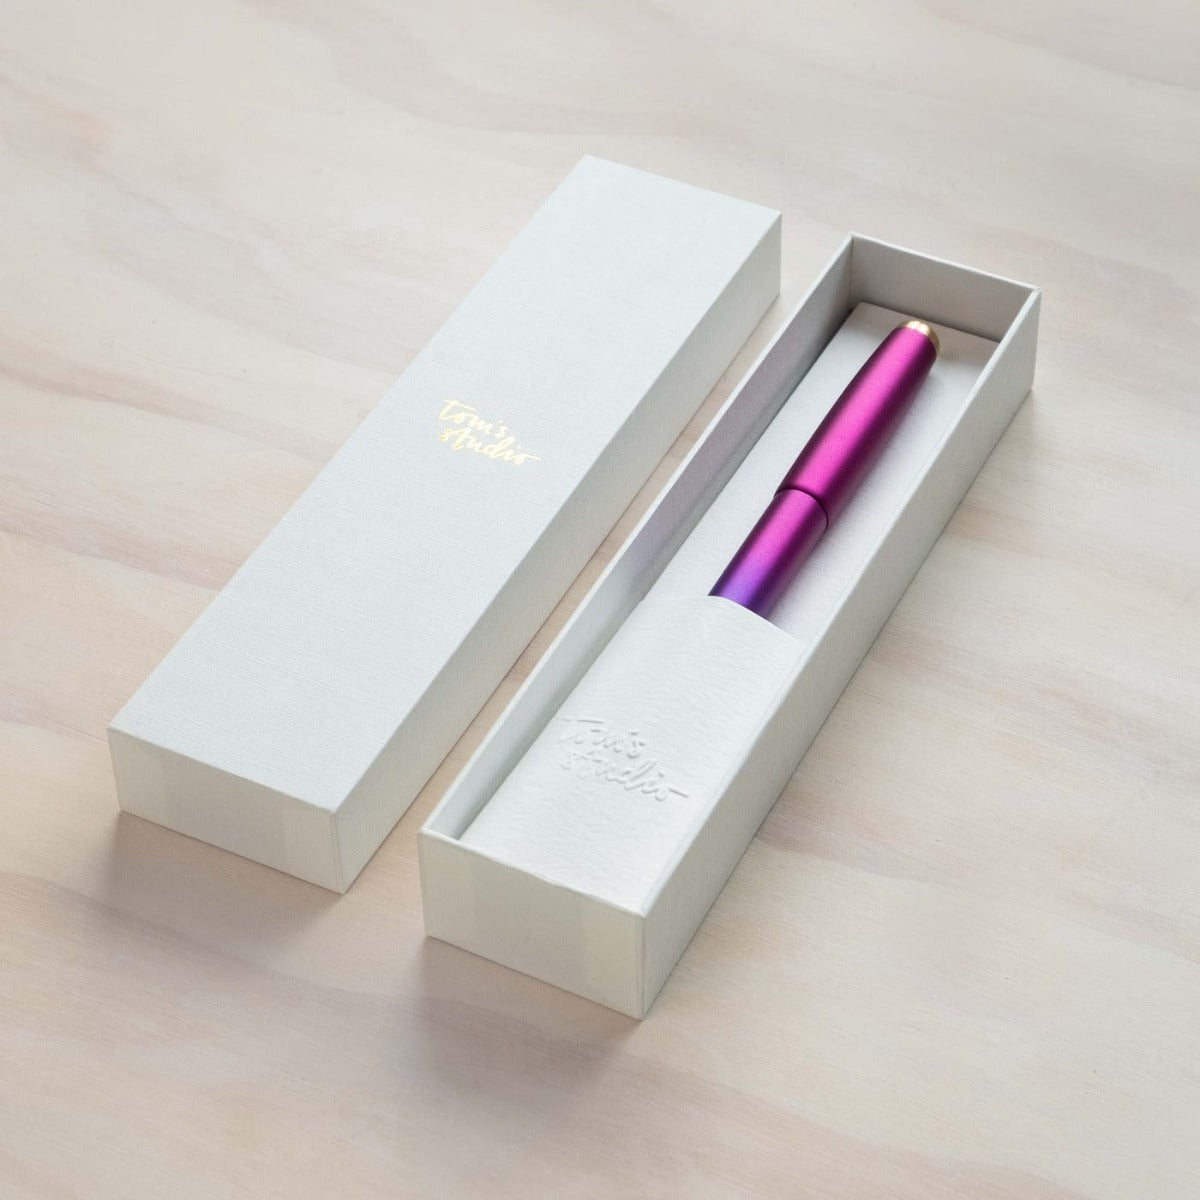 The Spark Fountain Pen in joy colouration in its box made for remarkable creativity